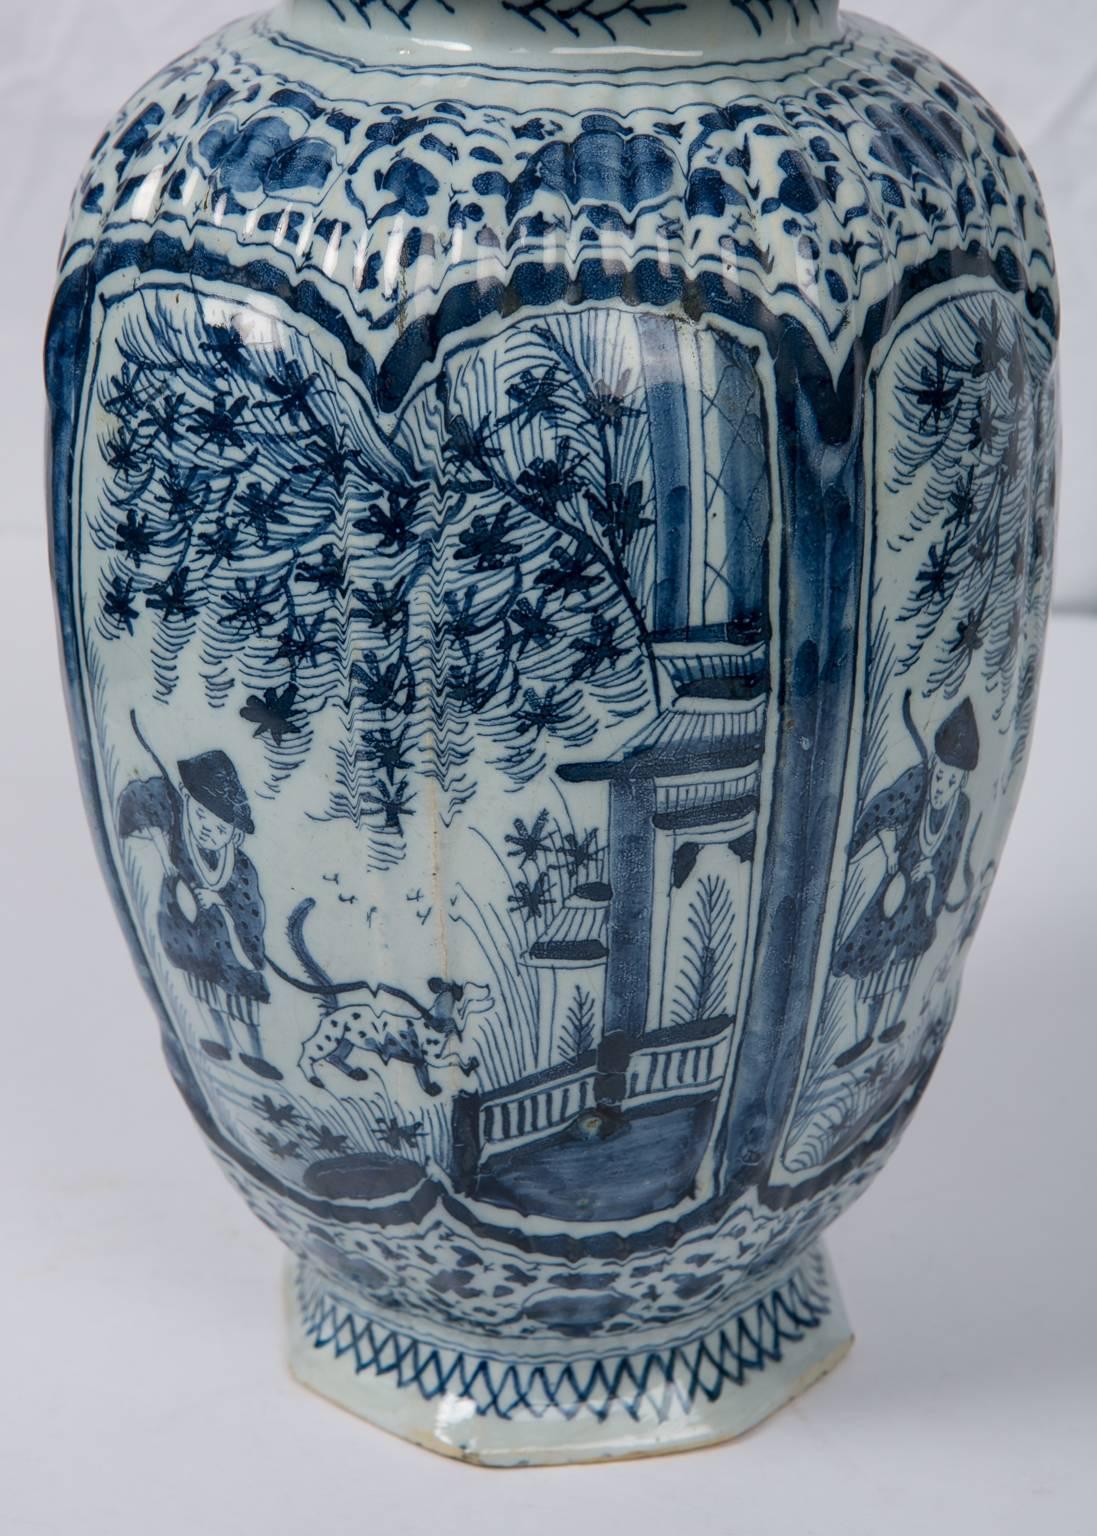 A lovely blue and white Dutch delft jar with panels painted in deep cobalt blue.
The vase shows a chinoiserie scene of a boy and his dog walking near a pagoda style pavilion with a tree on a fenced terrace.
The covered jar is topped by a traditional